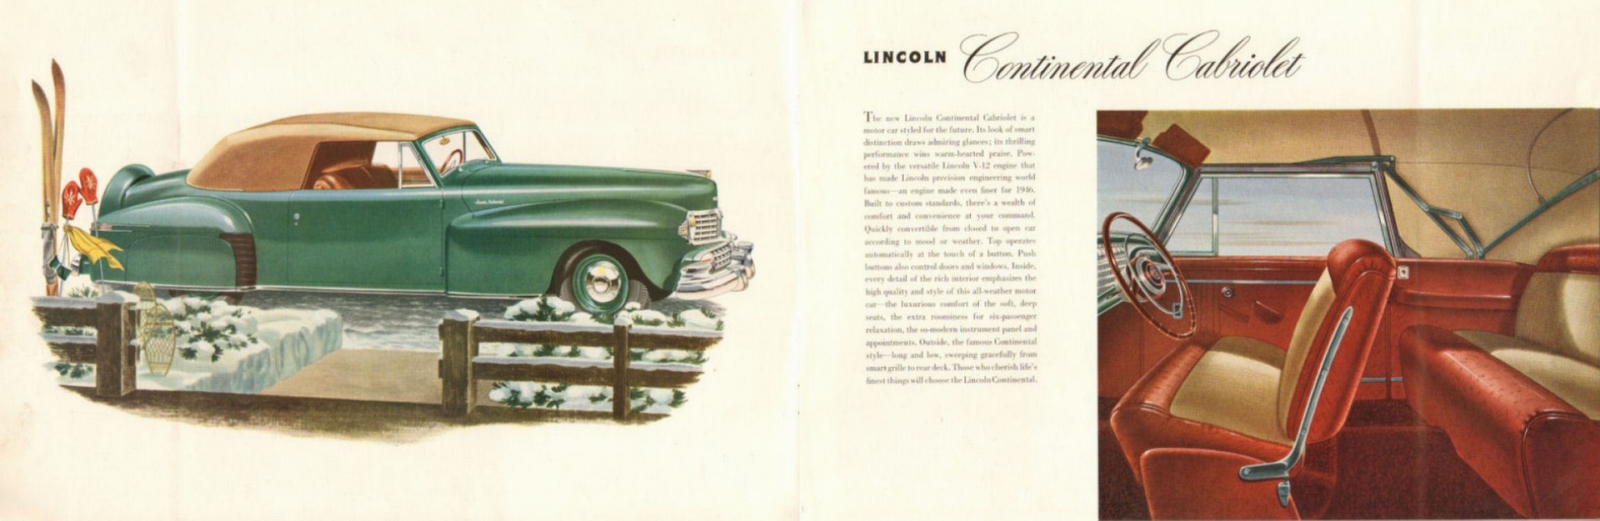 n_1946 Lincoln and Continental-14-15.jpg